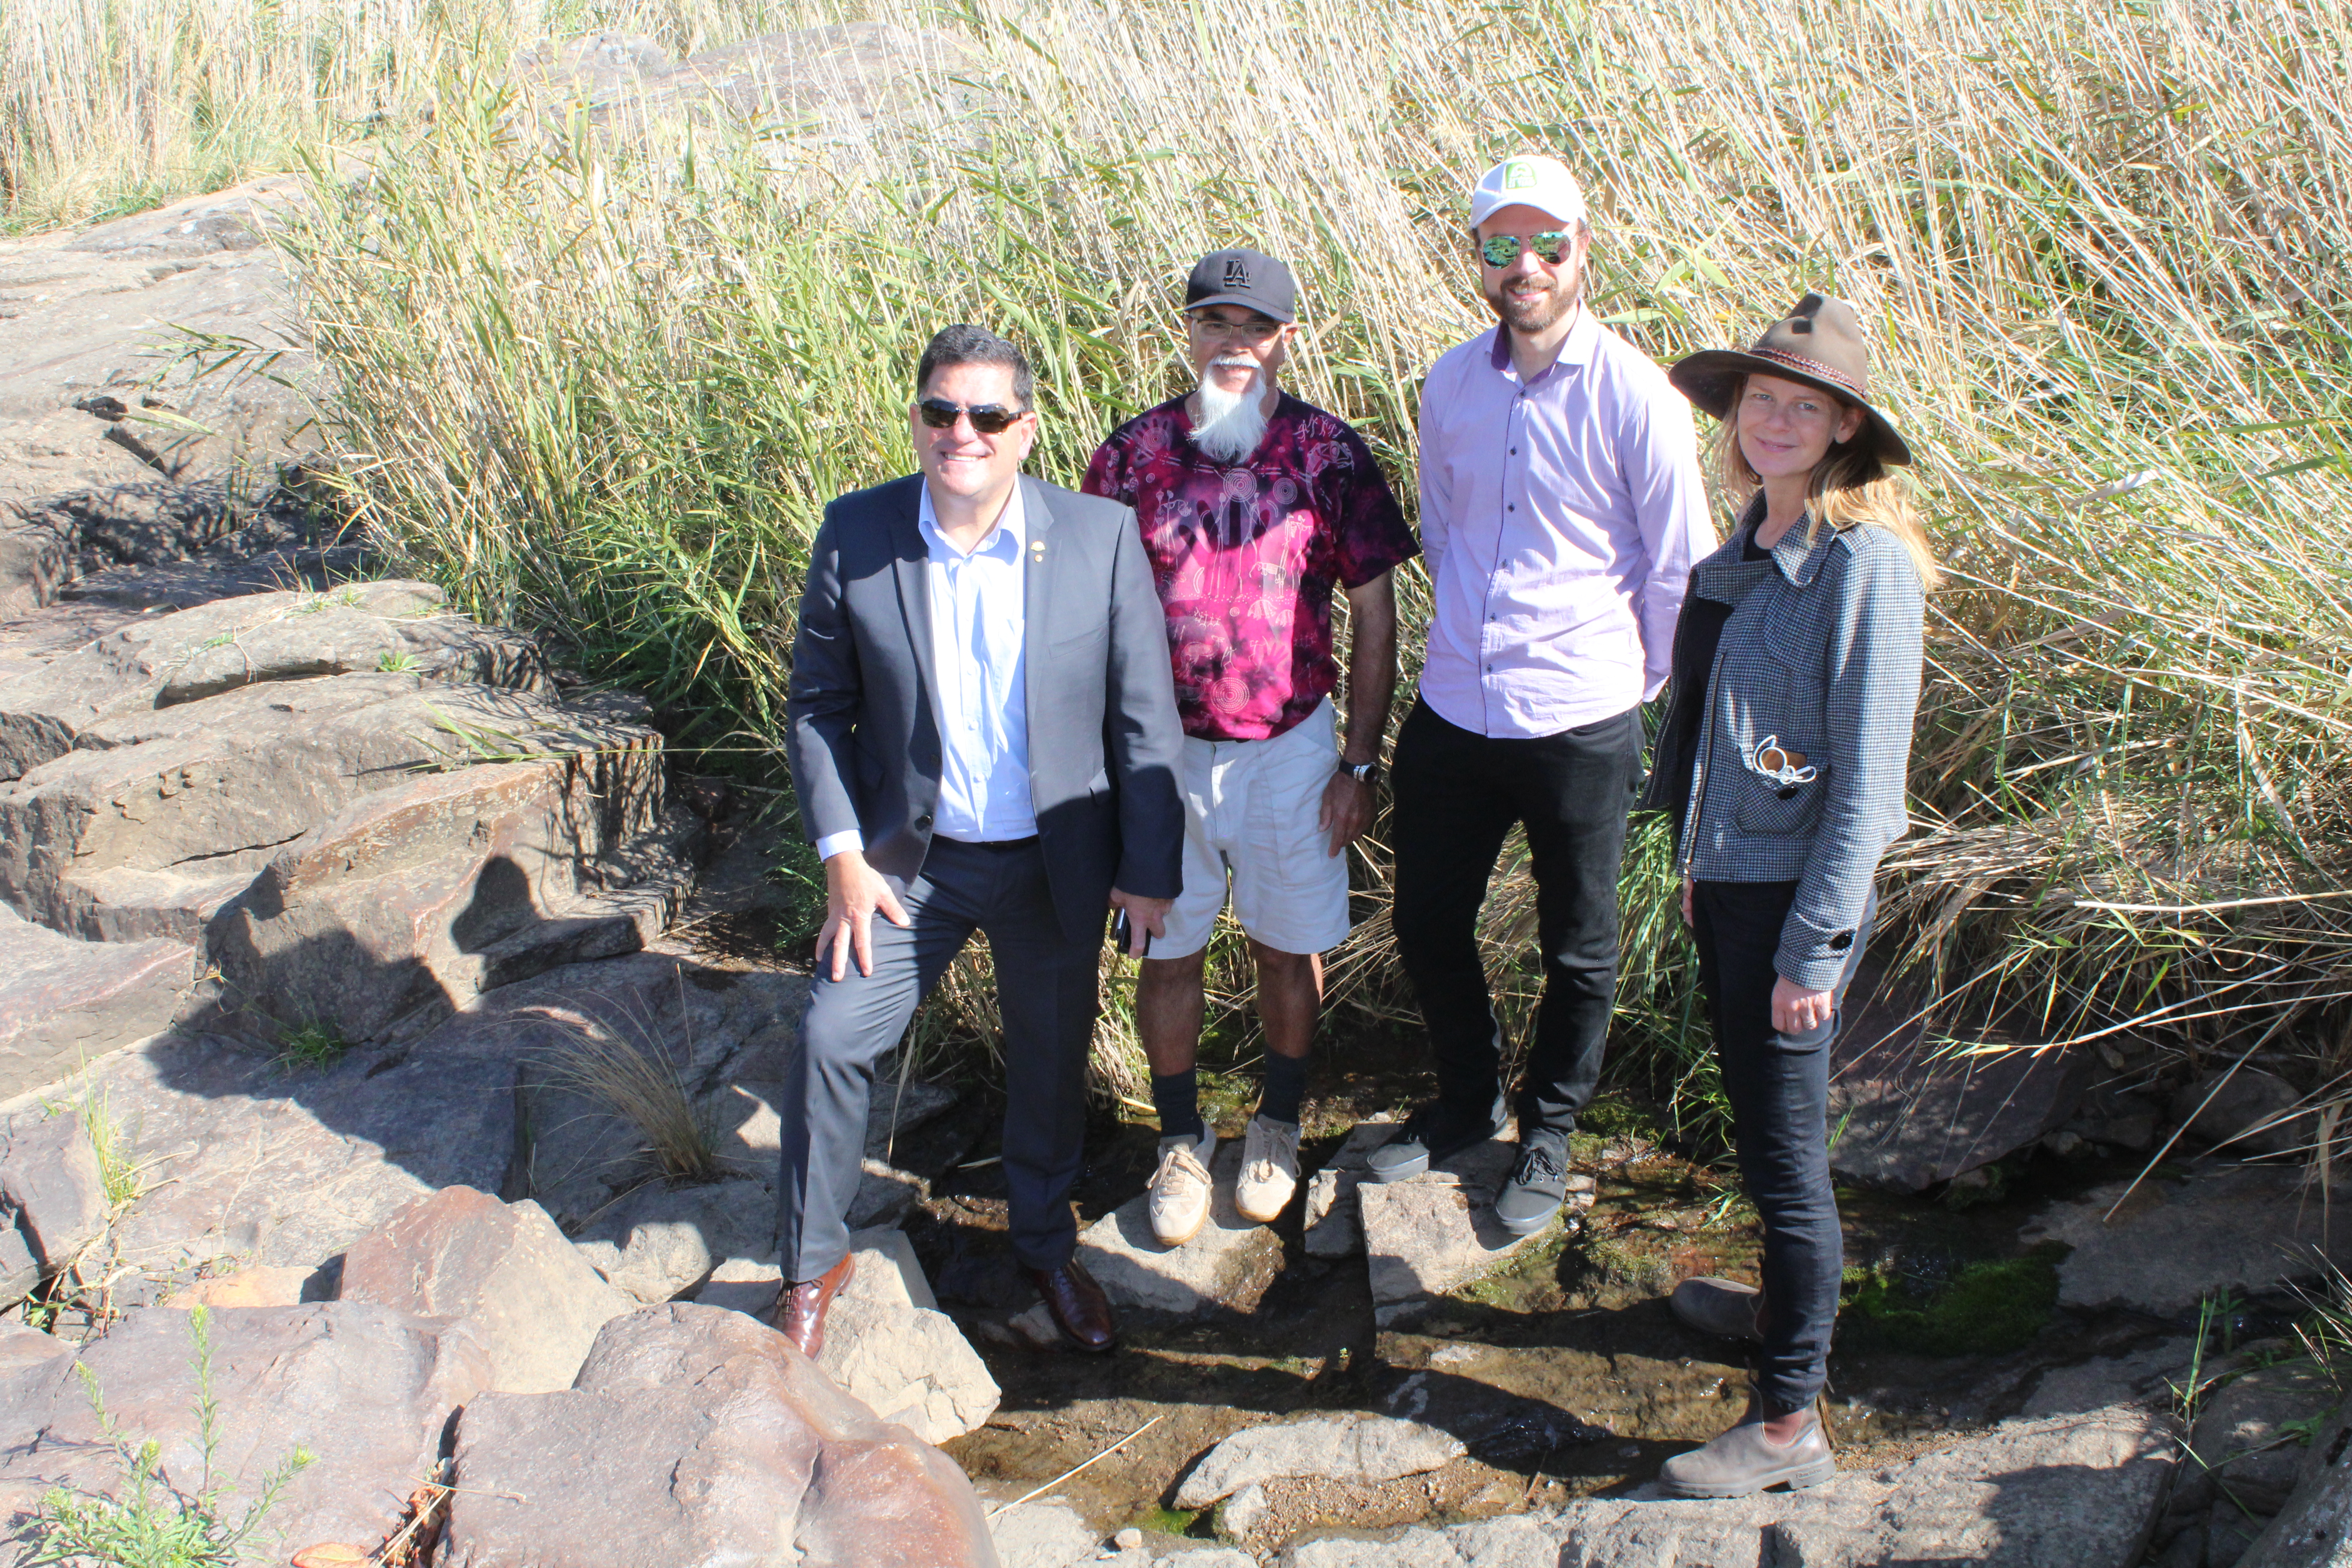 Lockheed Martin Australia is teaming up with Landcare Australia to support the restoration of important Aboriginal cultural sites in the Ginninderra catchment in Canberra.